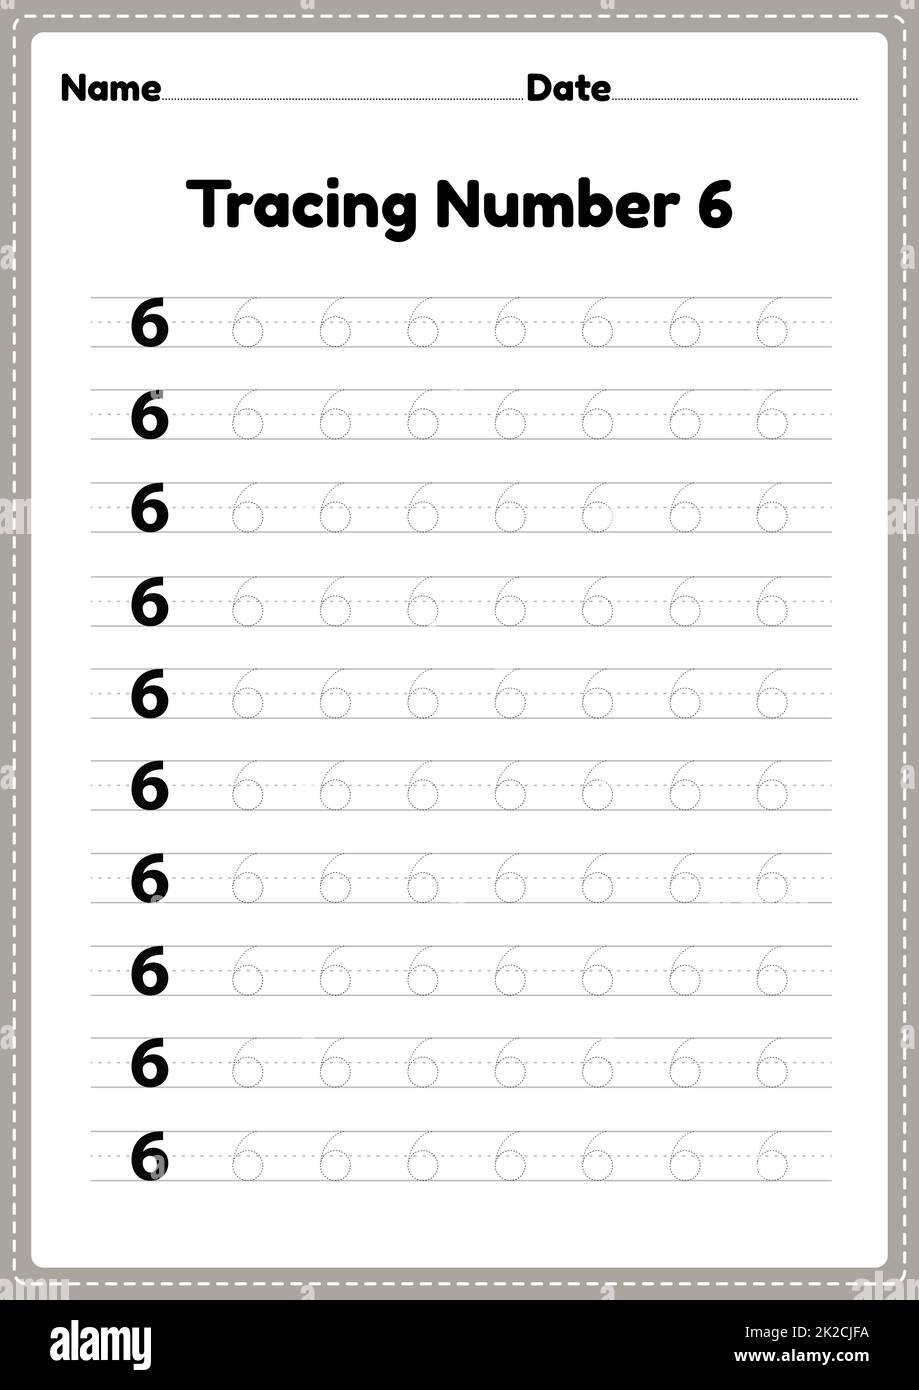 Tracing number 6 worksheet for kindergarten and preschool kids for educational handwriting practice in a printable page. Stock Photo